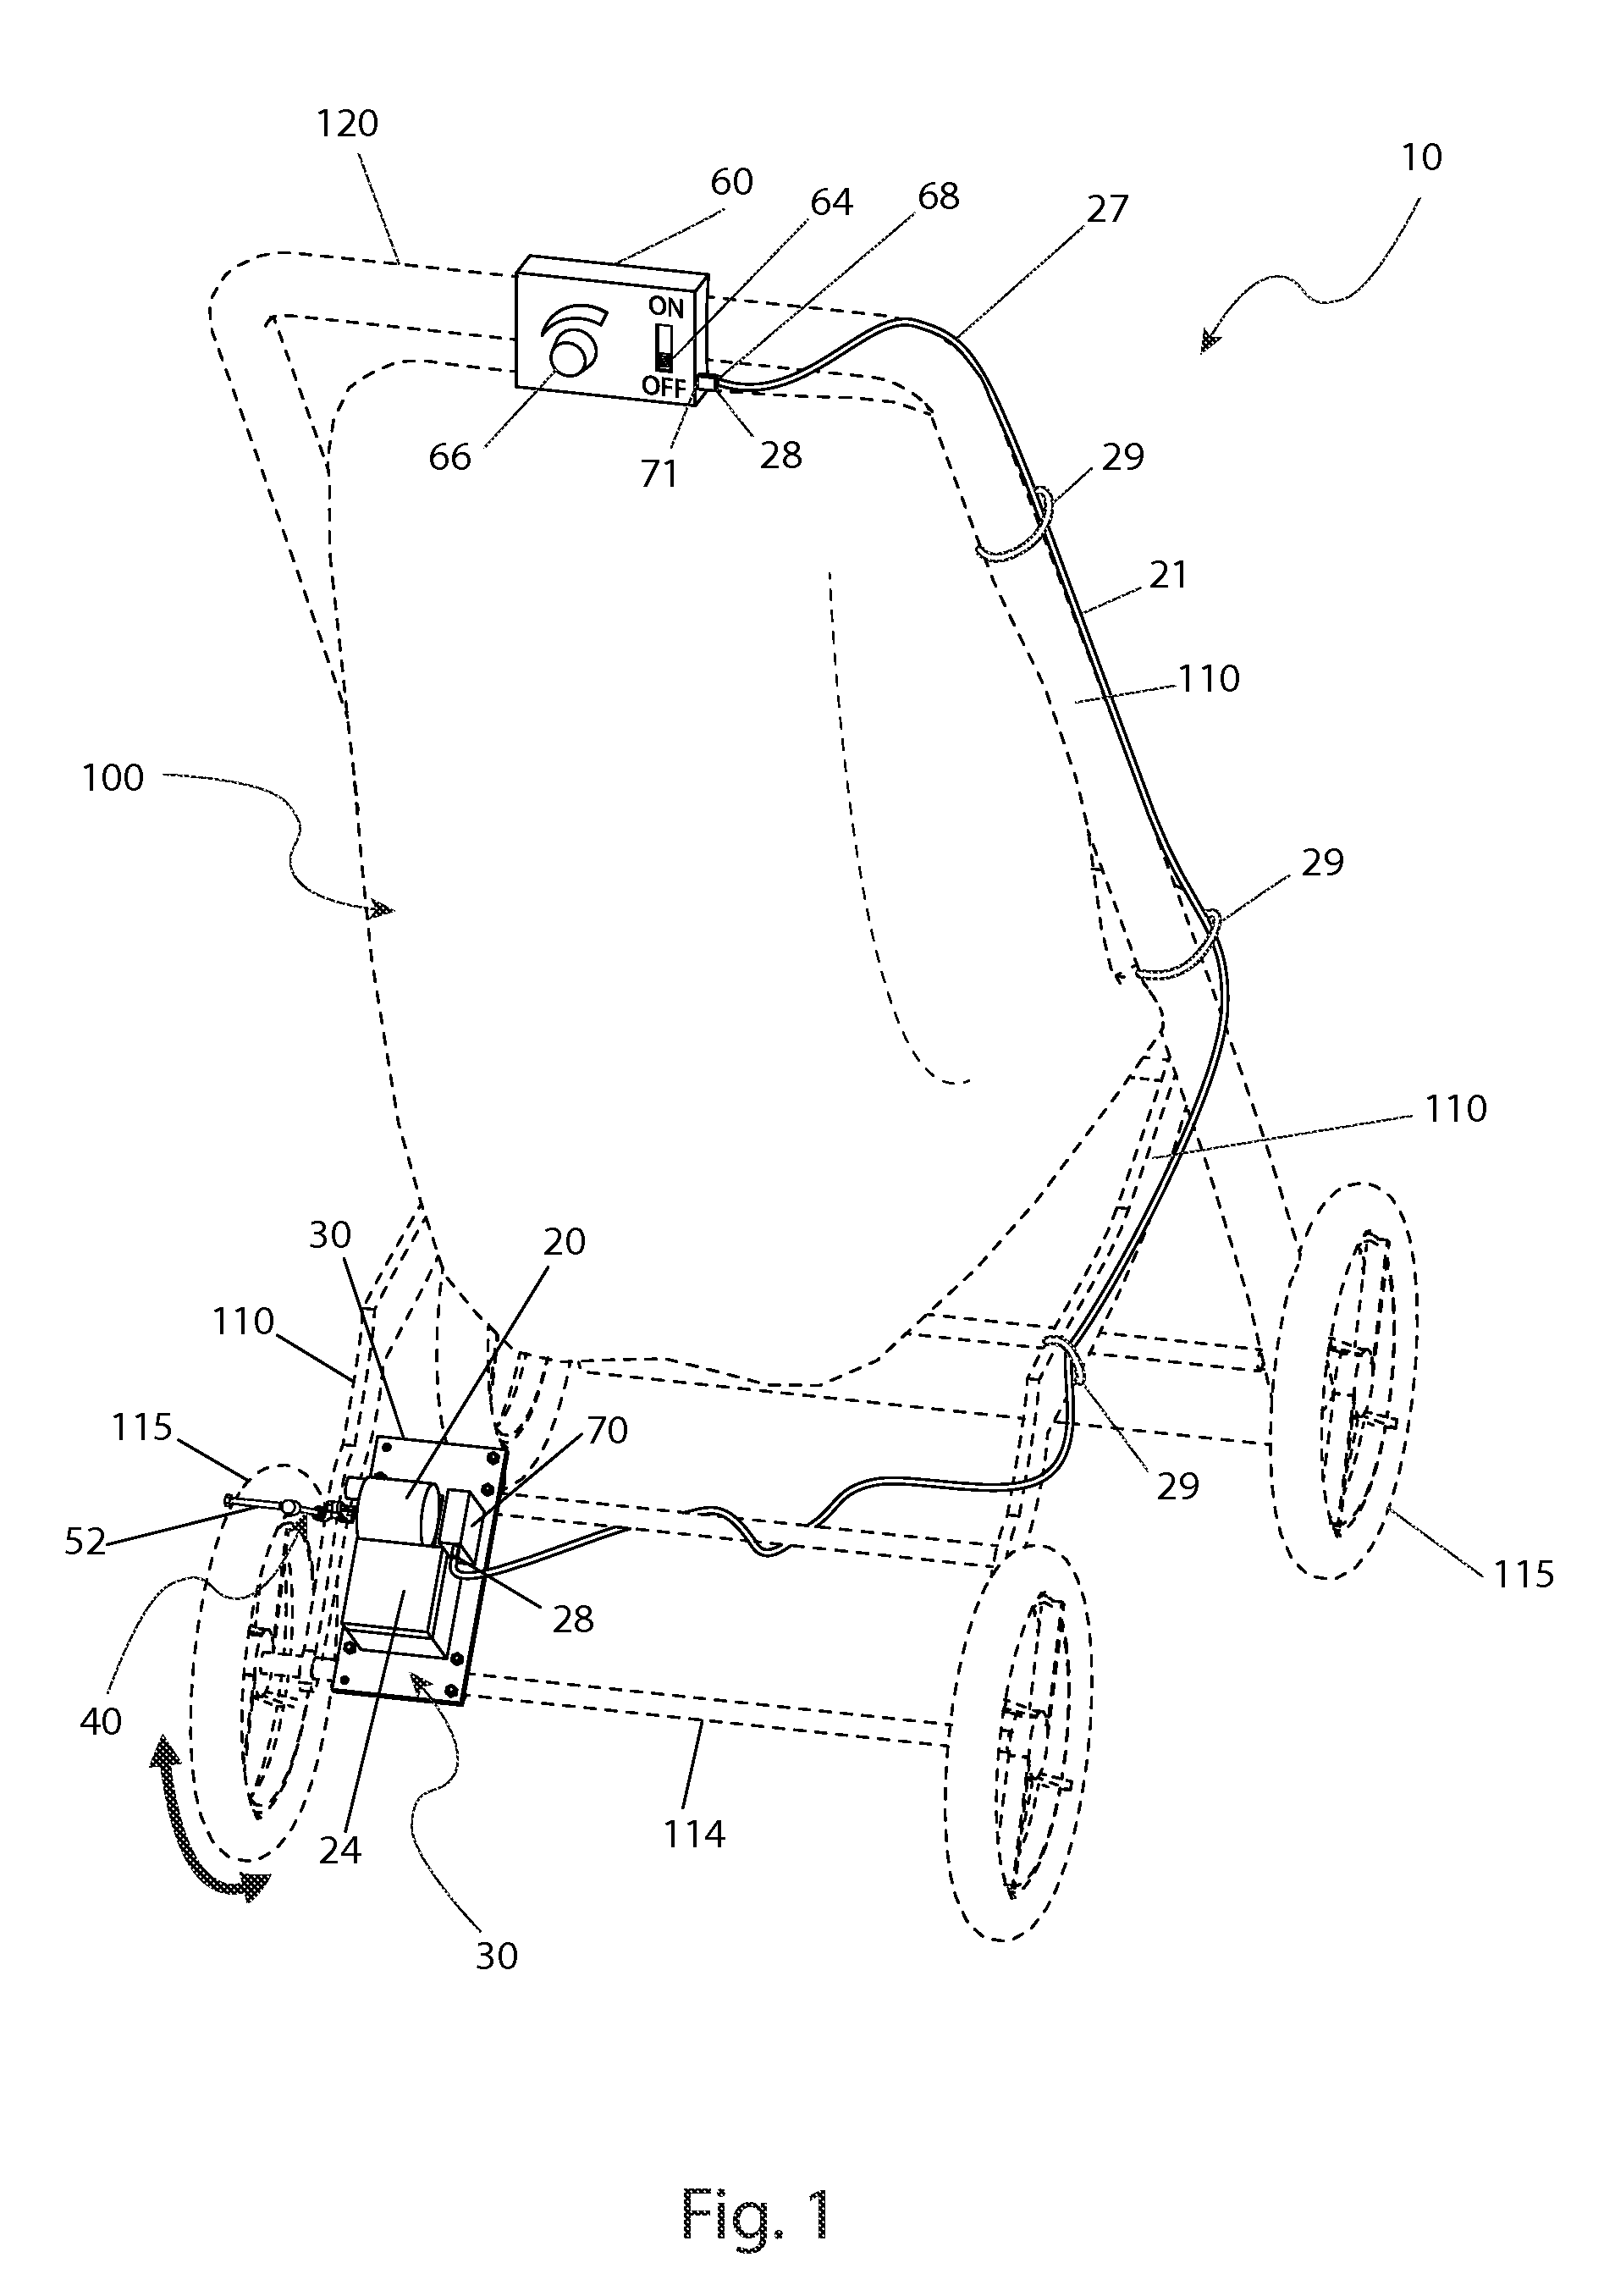 Reciprocating motion apparatus for a stroller